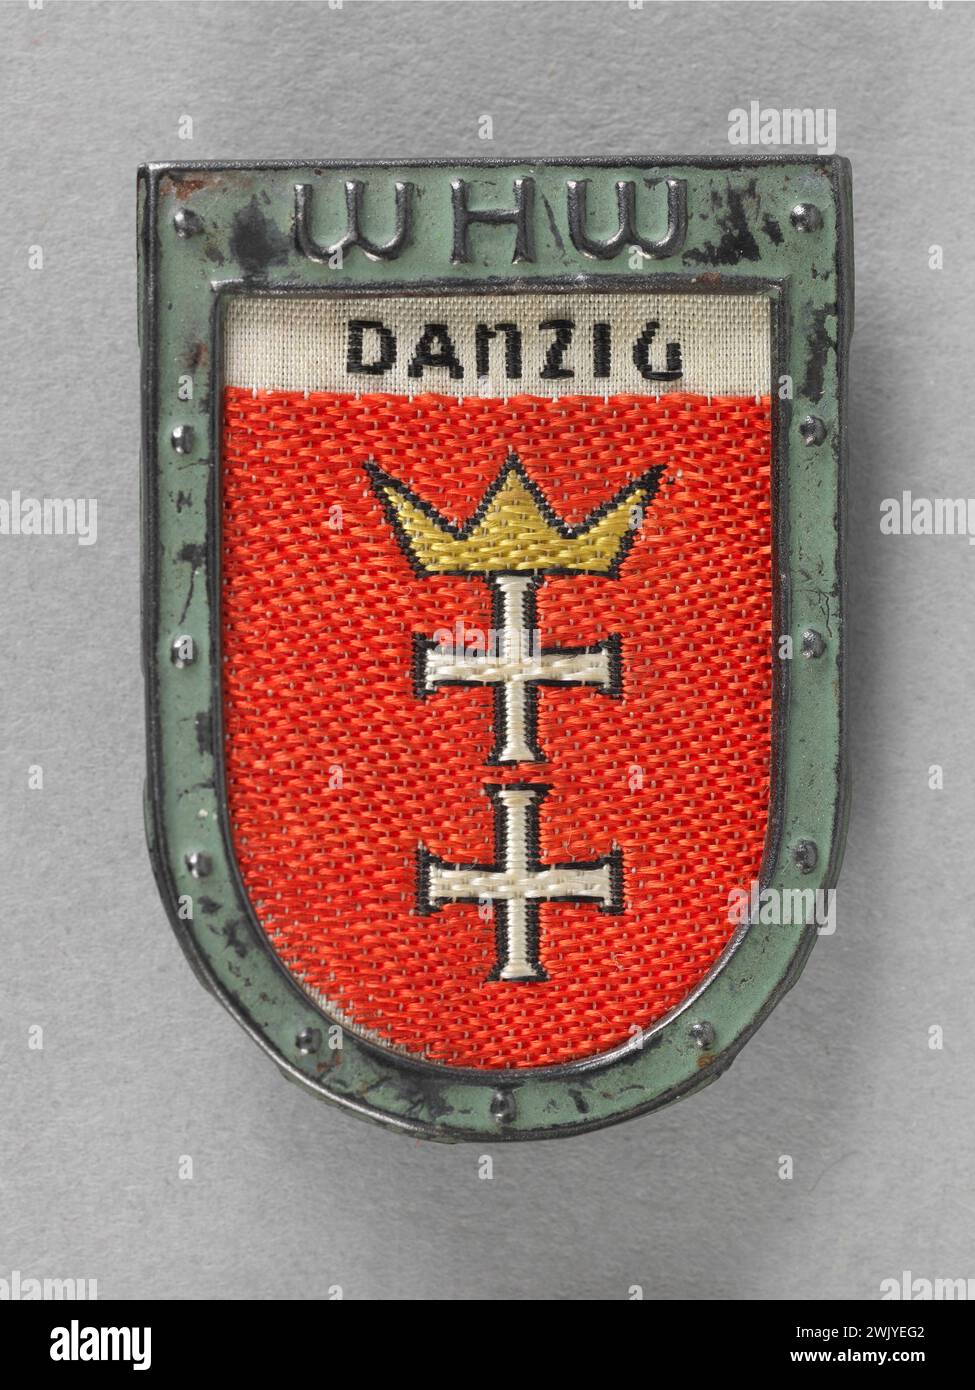 Winterhilfswerk des Deutschen Volkes (WHW) Danzig insignia (Dantzig) handed over during quests for the benefit of the Winterhilfswerk (WHW: Winter help work) (attributed title), 1933. Stamped metal, fabric, painting, cardboard paper. Museum of the Liberation of Paris - General Leclerc Museum - Jean Moulin Museum. Stock Photo